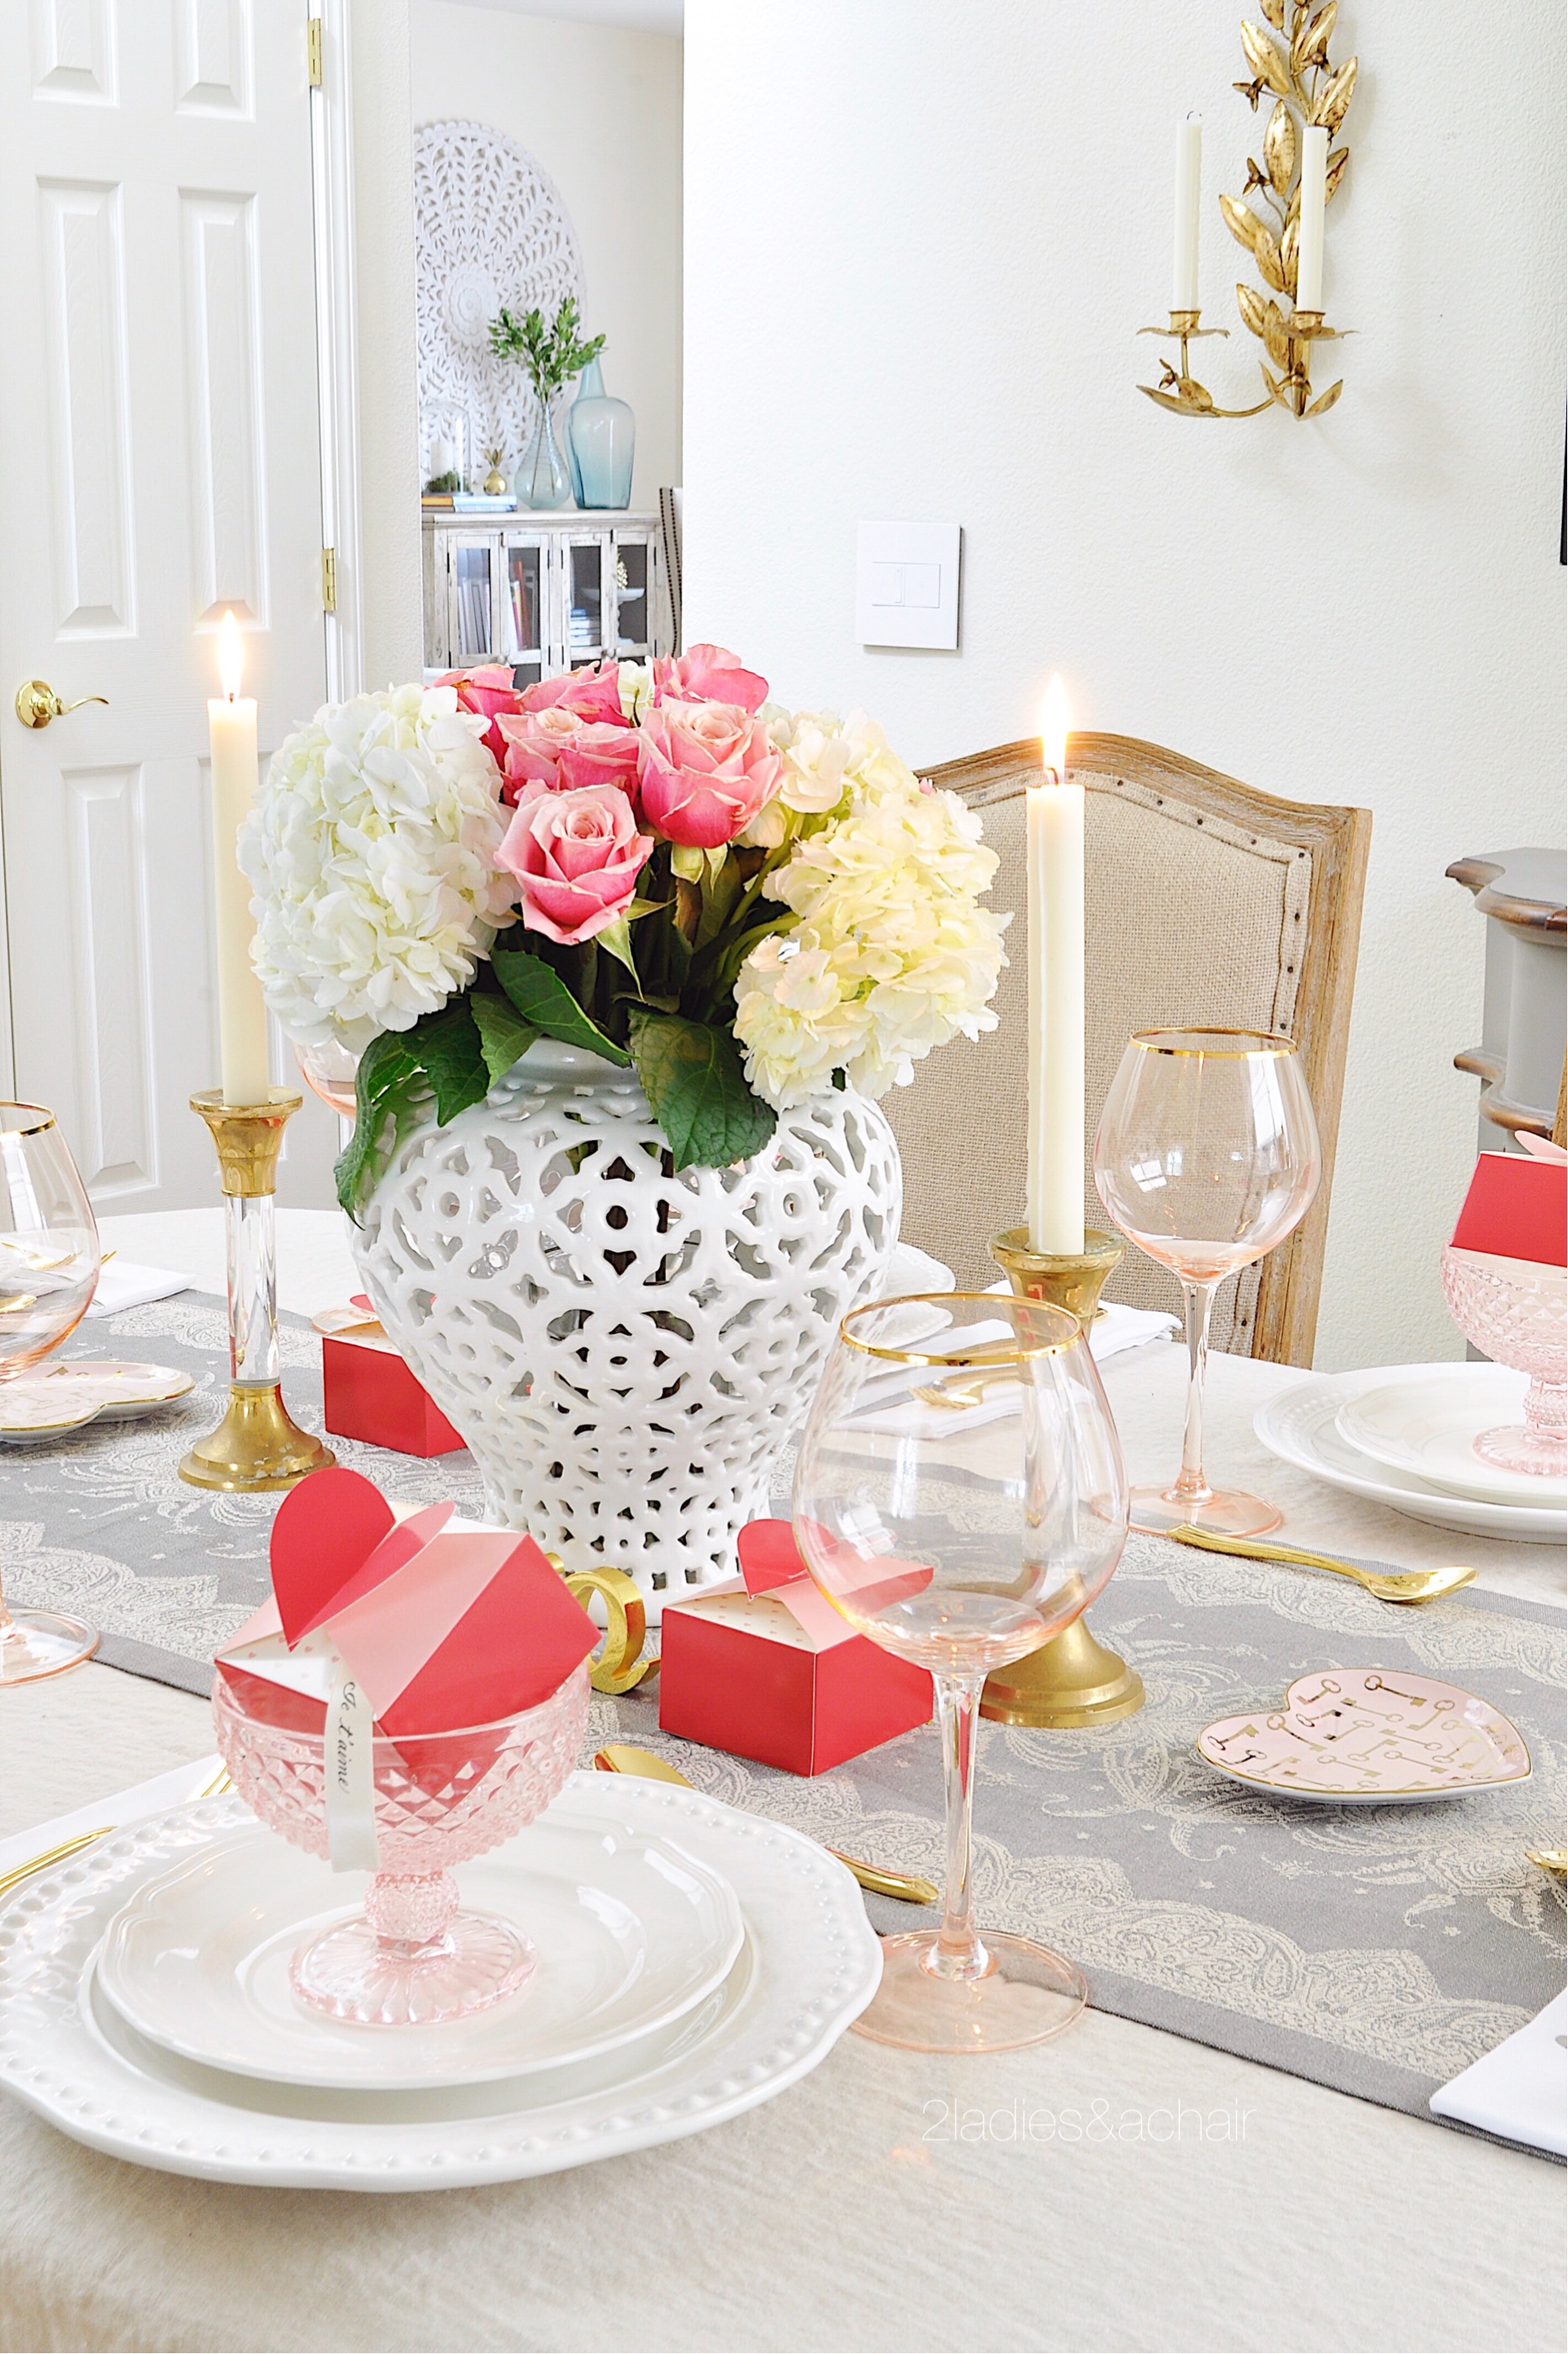 Valentine's Table for Two - Celebrate & Decorate